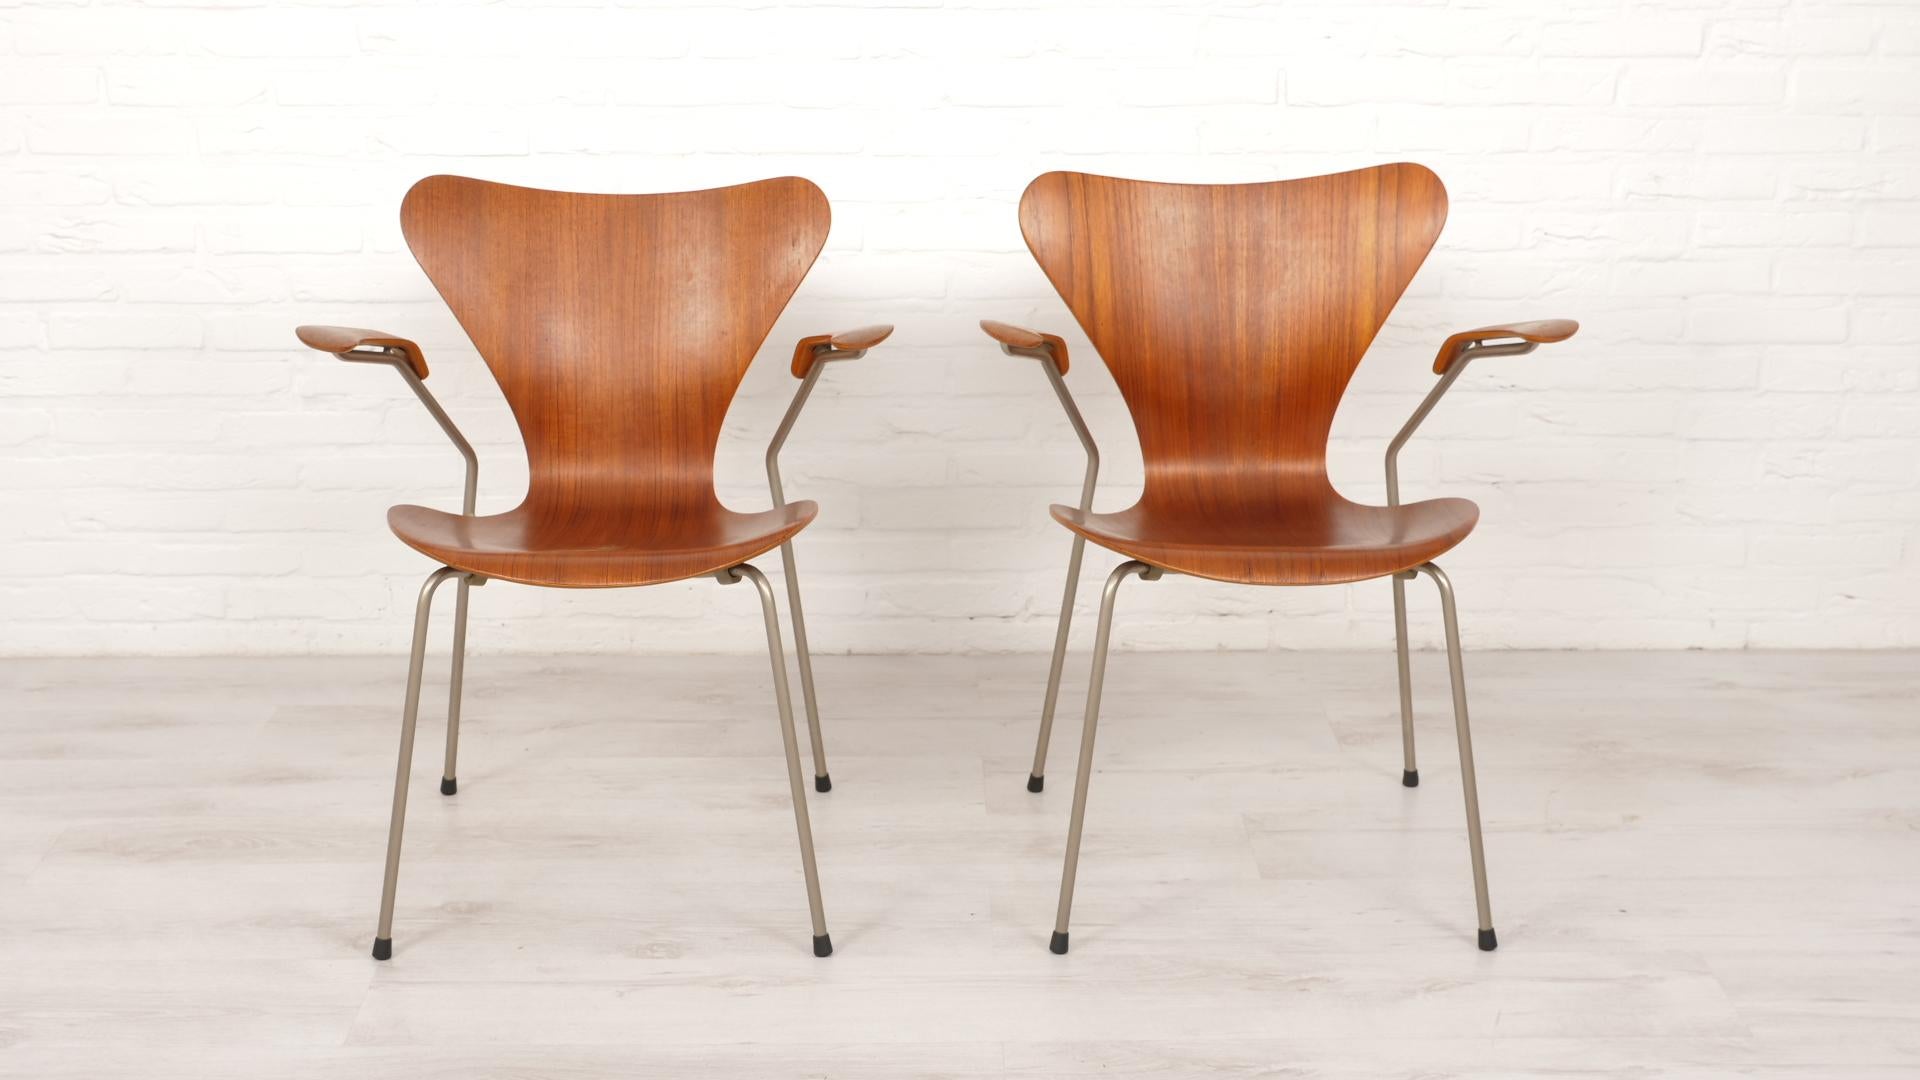 Set of 2 beautiful vintage butterfly chairs with armrest model 3207, designed by Arne Jacobsen for Fritz Hansen. This set is in Teak and is an early edition.

Design period: 1950 - 1960
Style: Mid-century modern - Danish design - Scandinavian